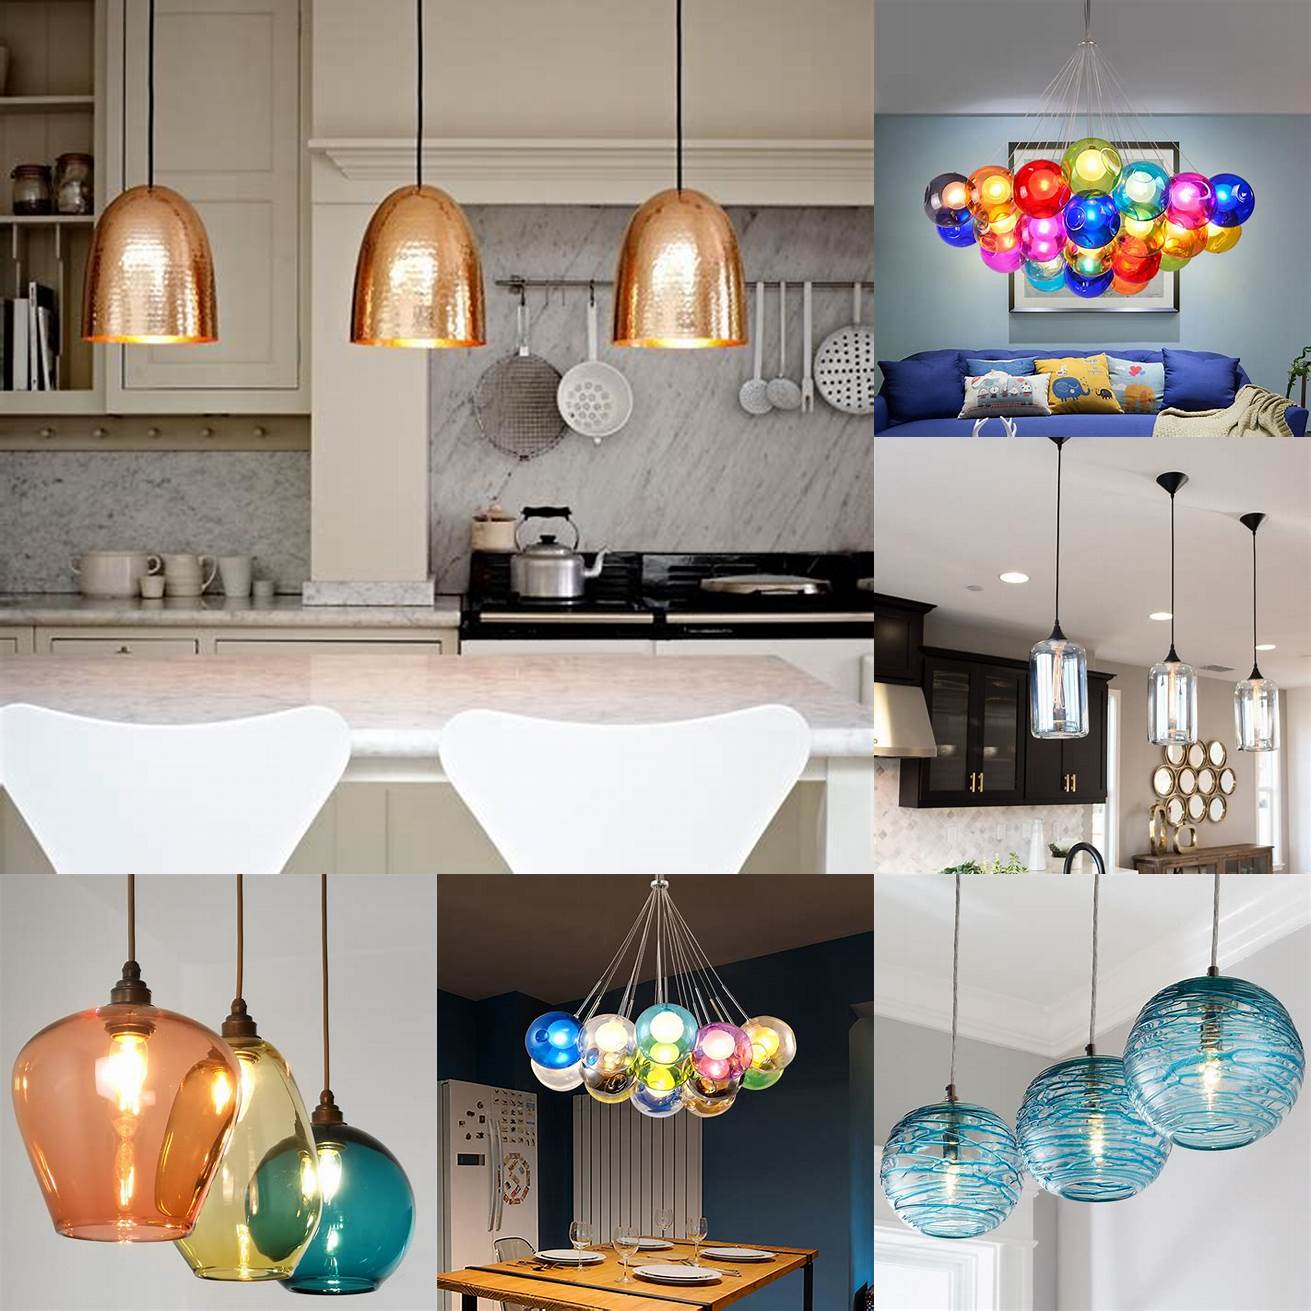 Colored pendant lights in a workspace